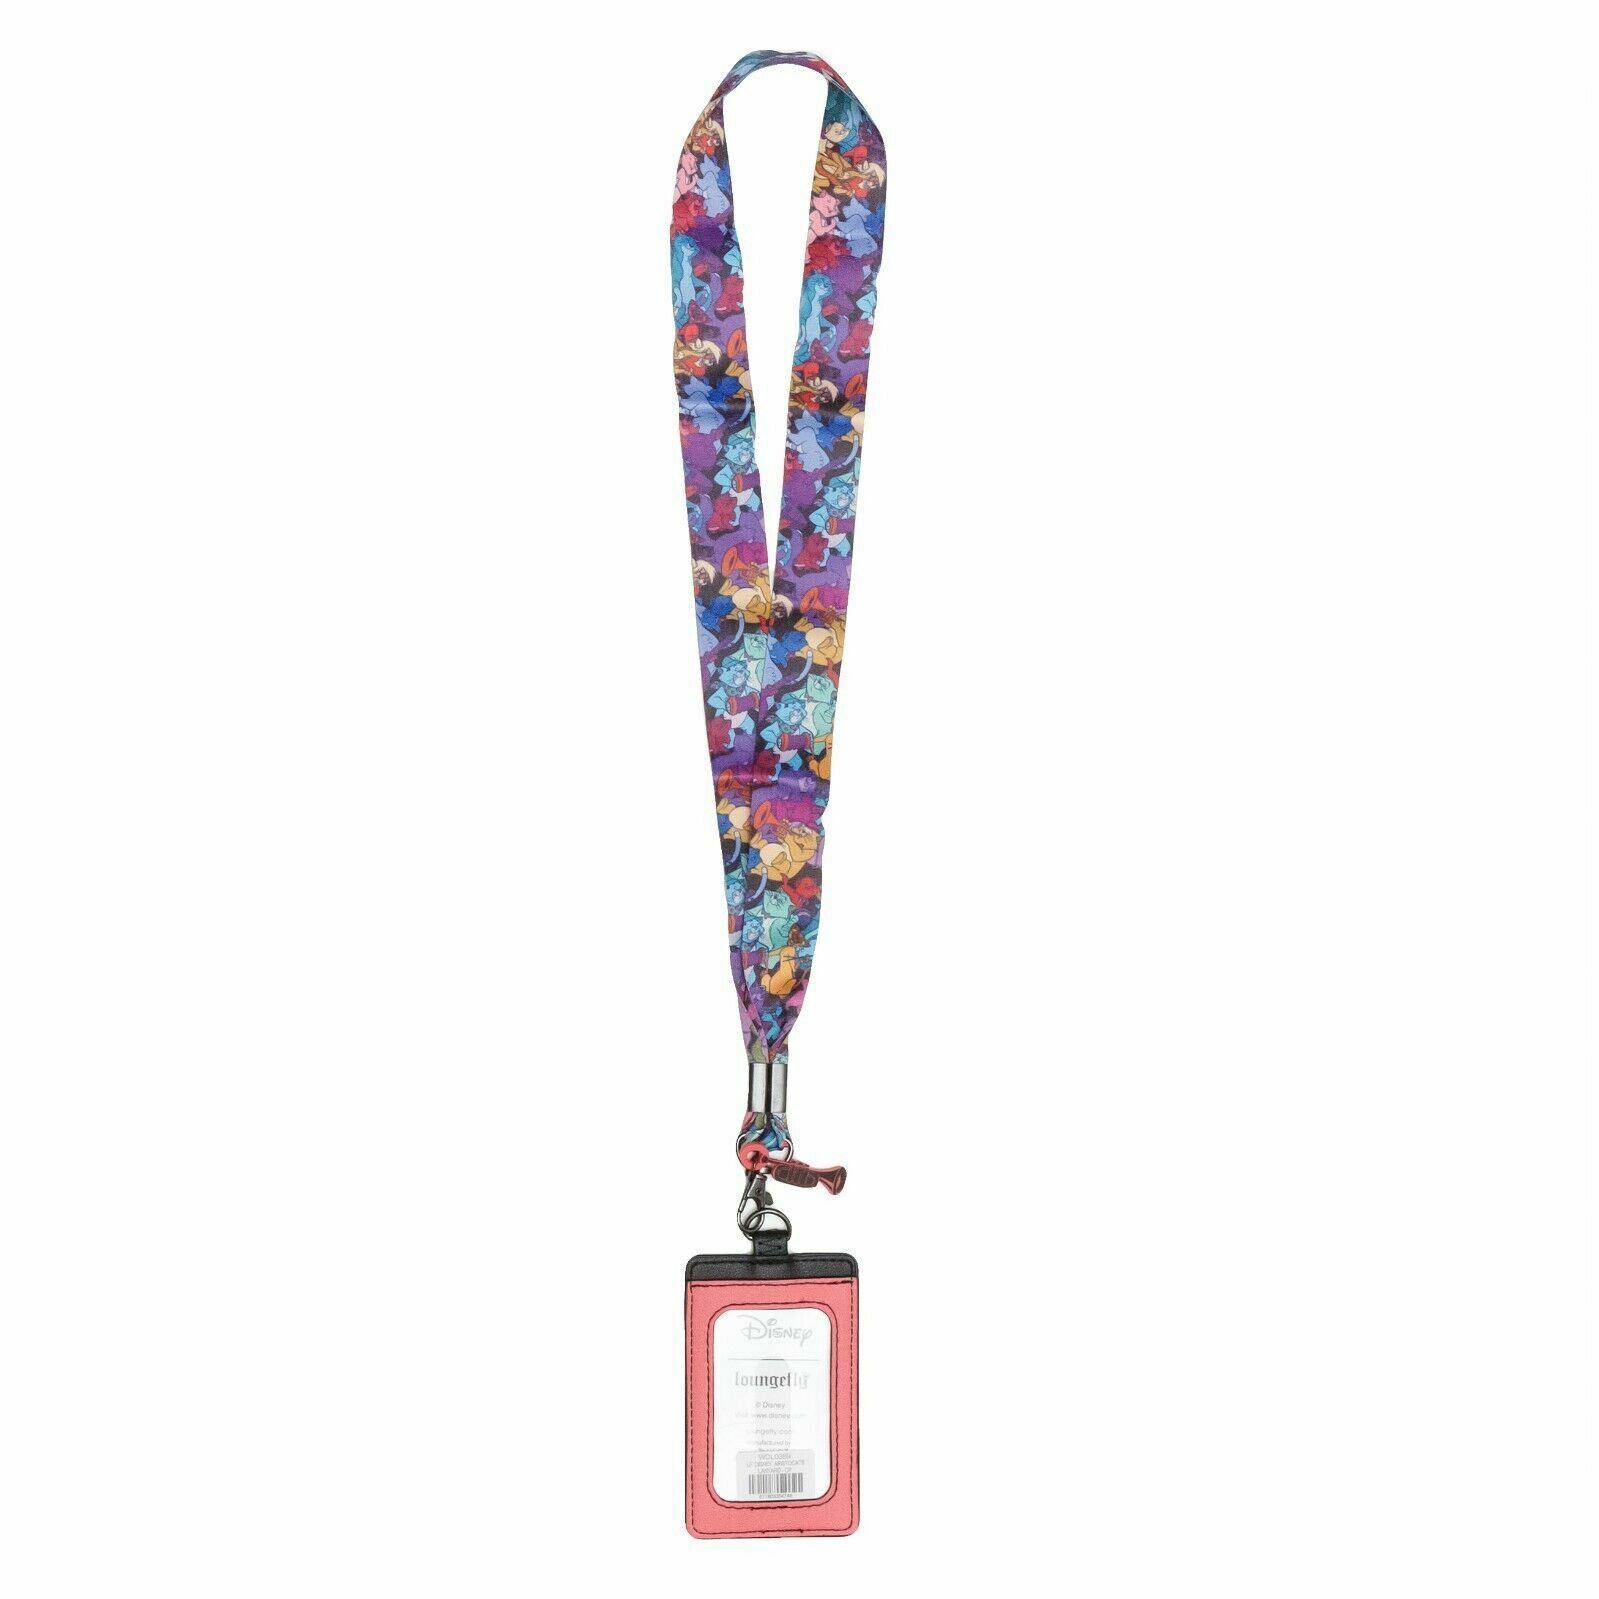 New Disney's The Aristocats Lanyard with Charm and Cardholder by Loungefly